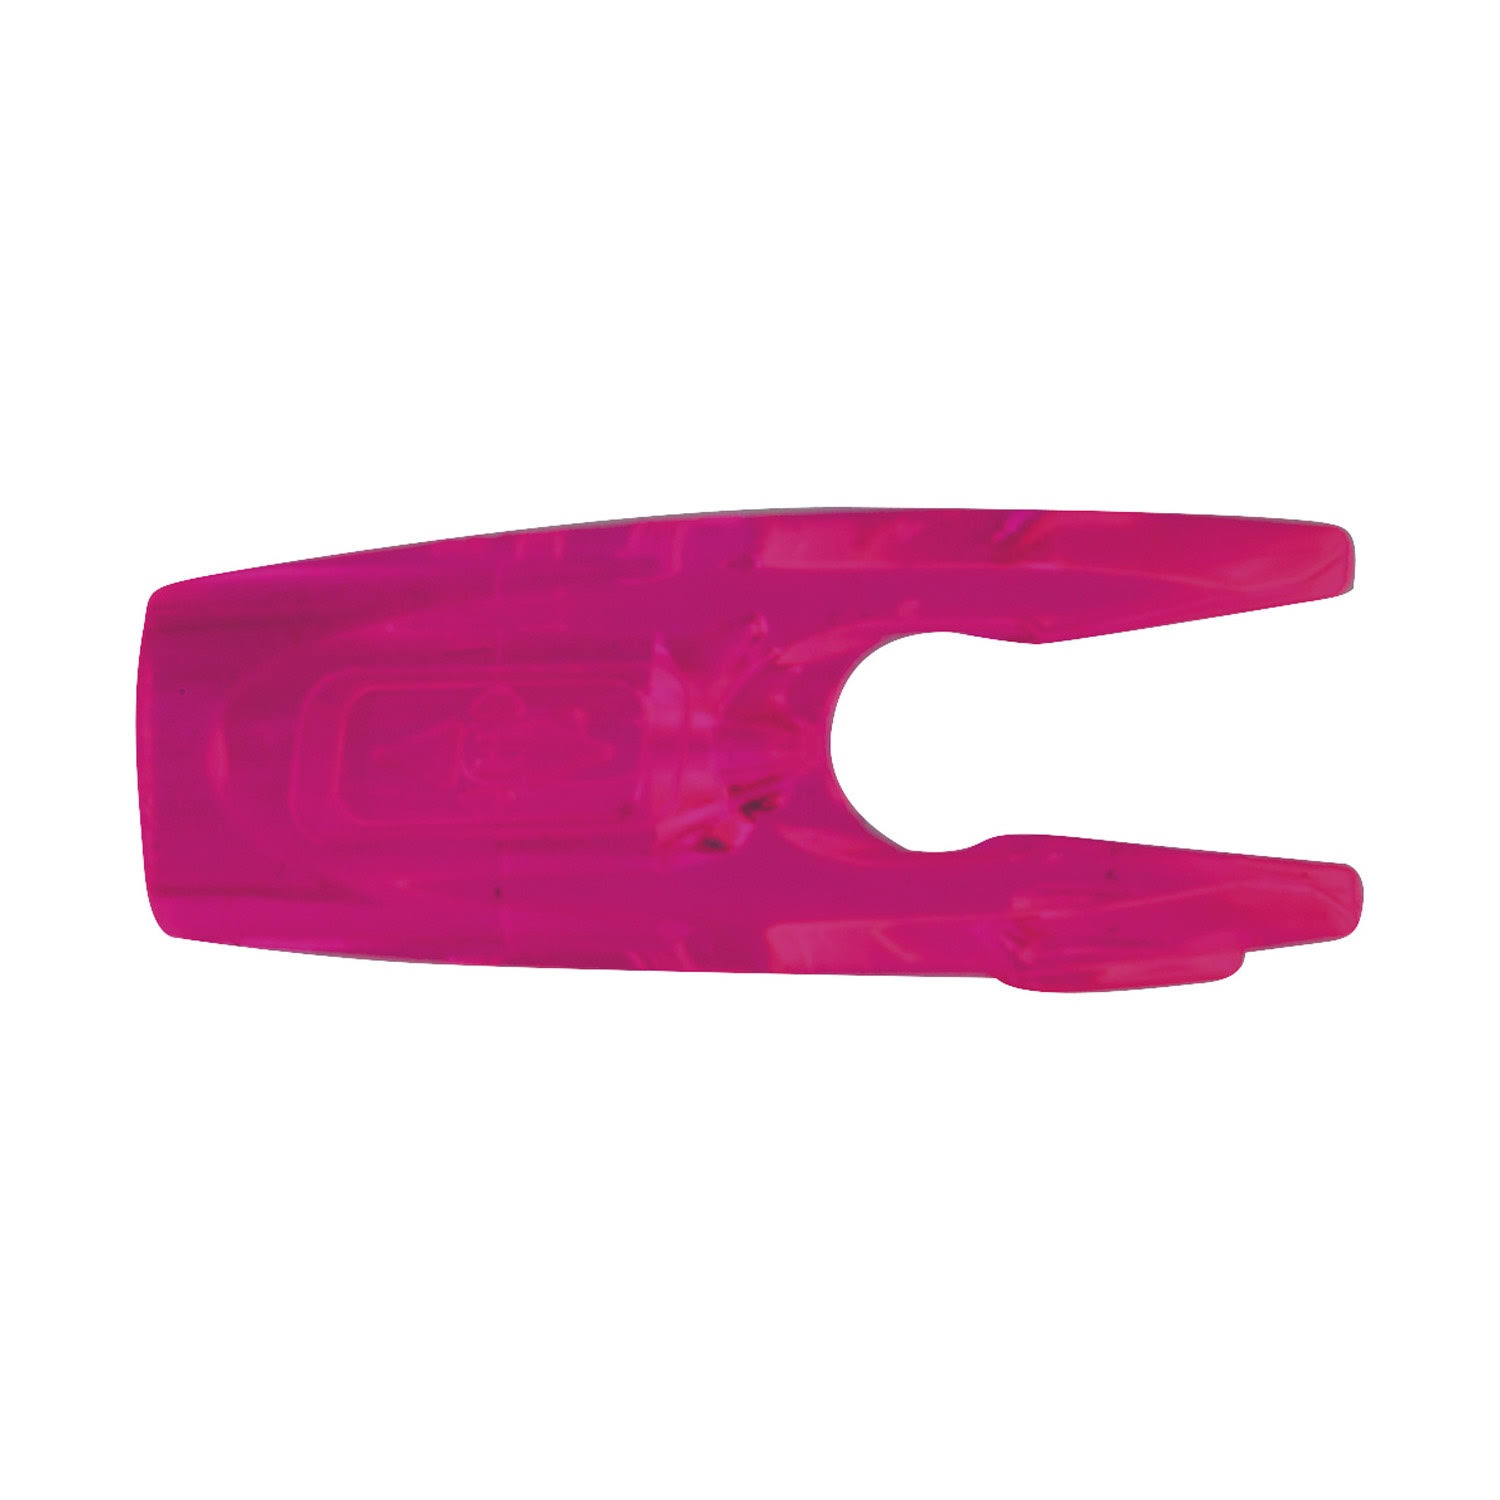 Easton Technical Products Pin Nock - Pink, 4mm